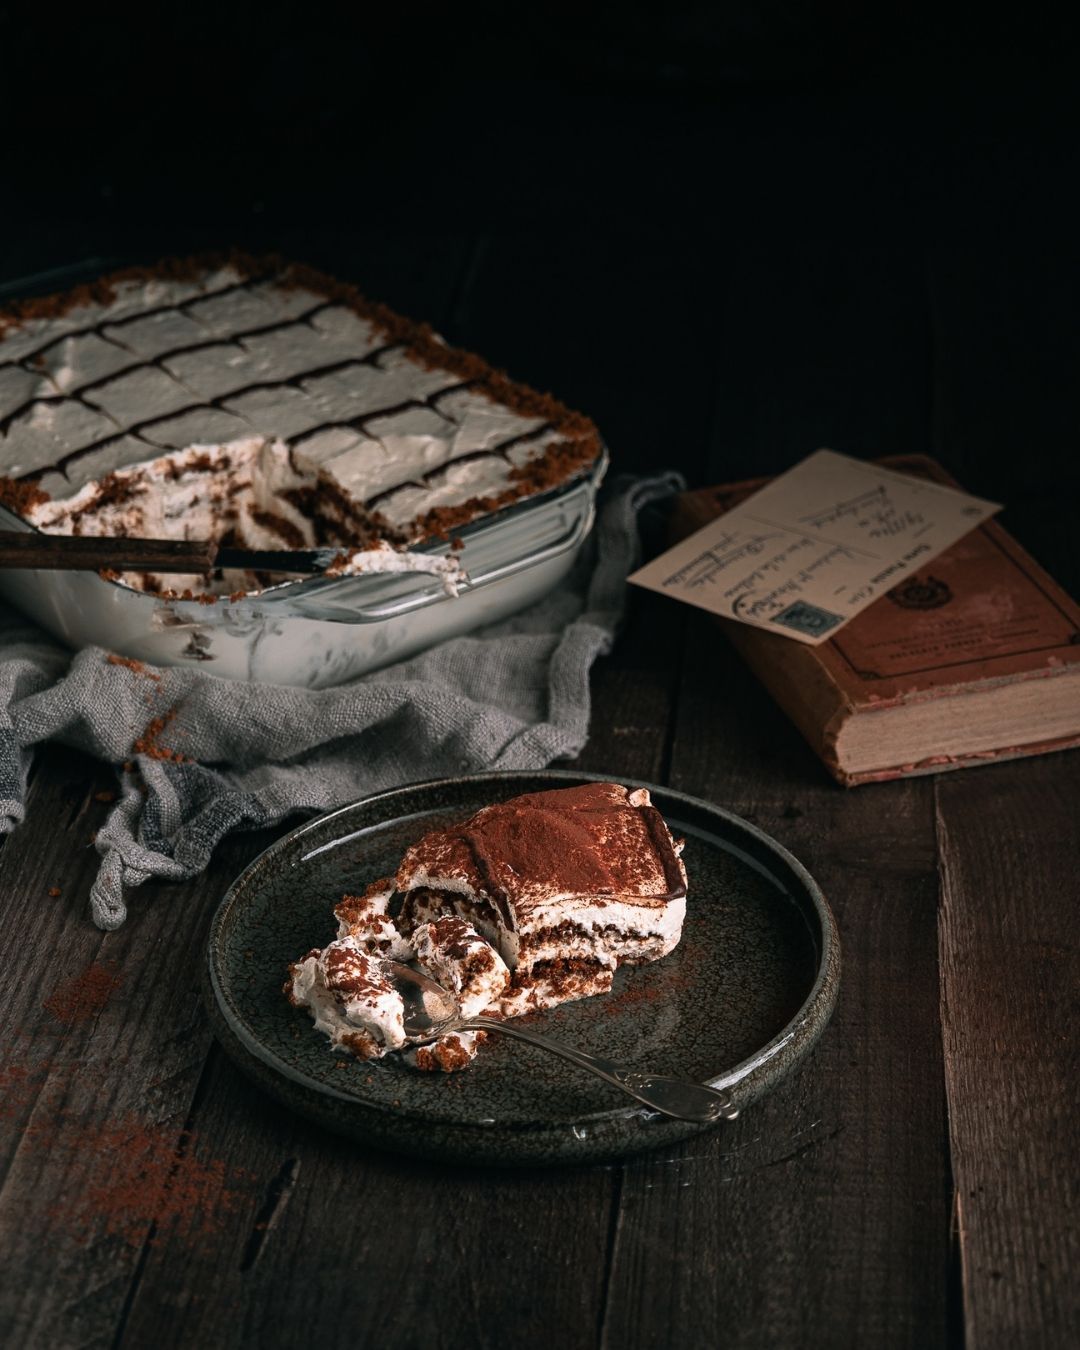 Classic with a twist: Tiramisu with speculoos ️